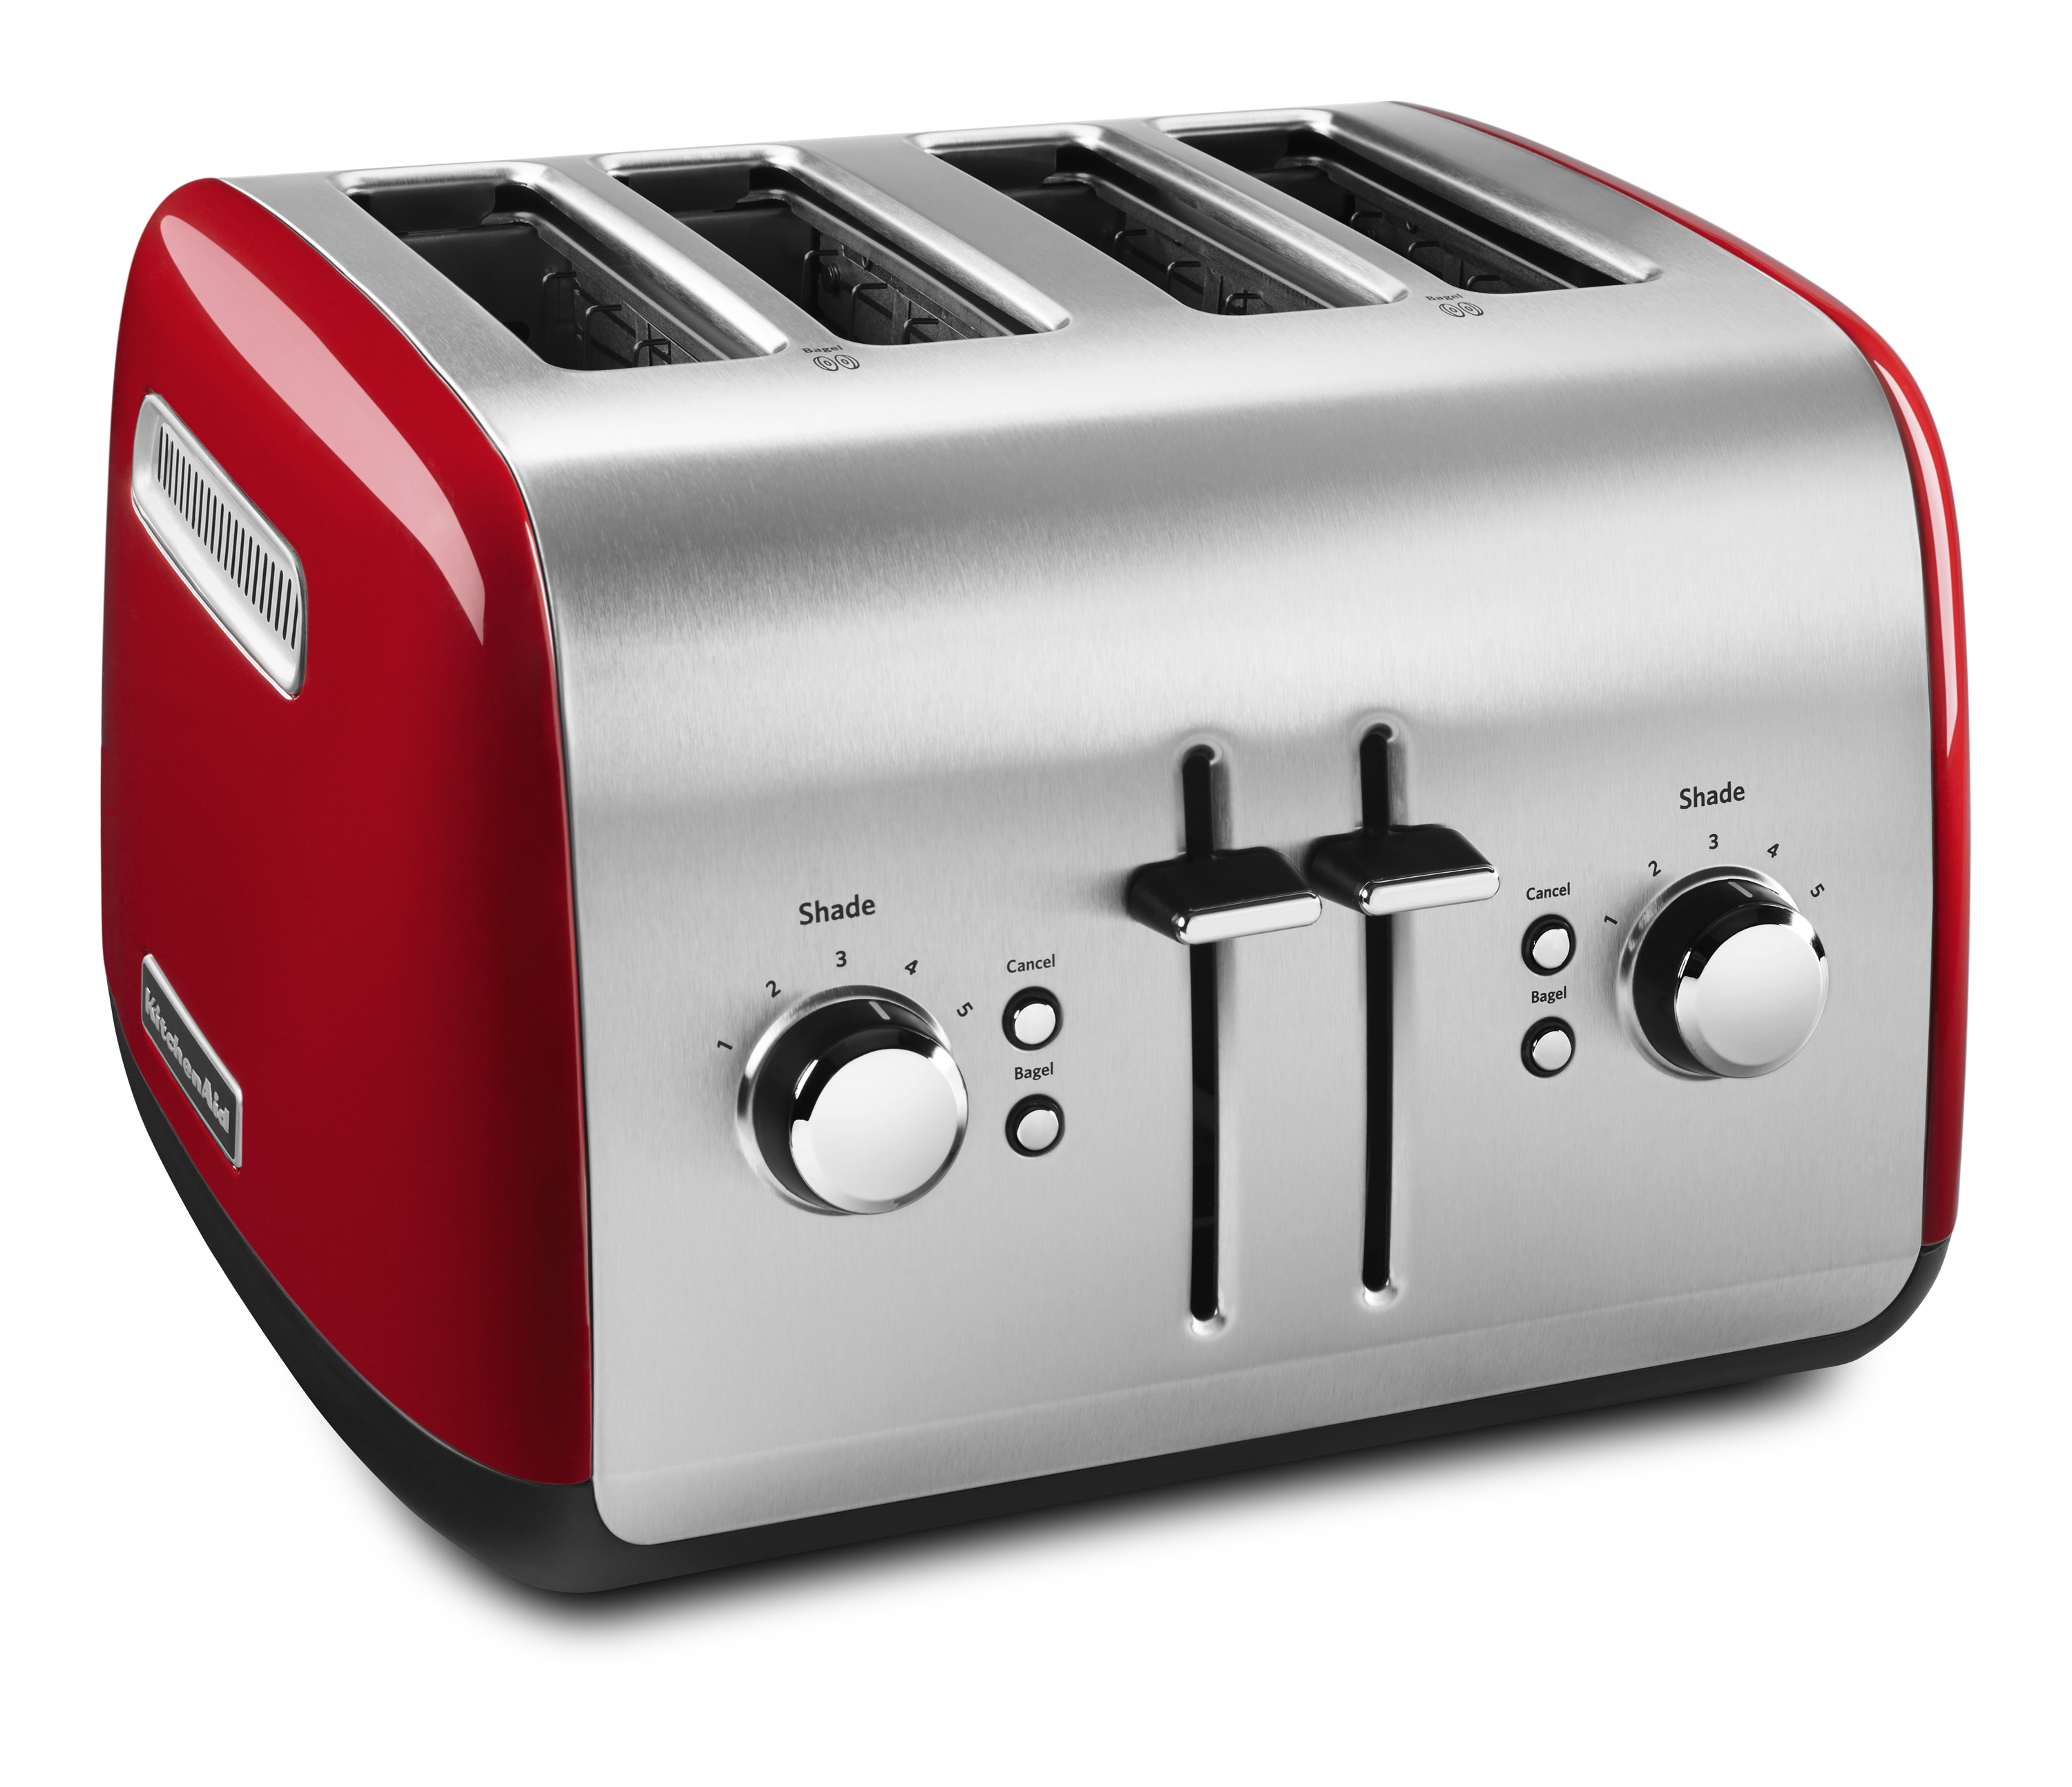 4 slice toaster with extra wide slots